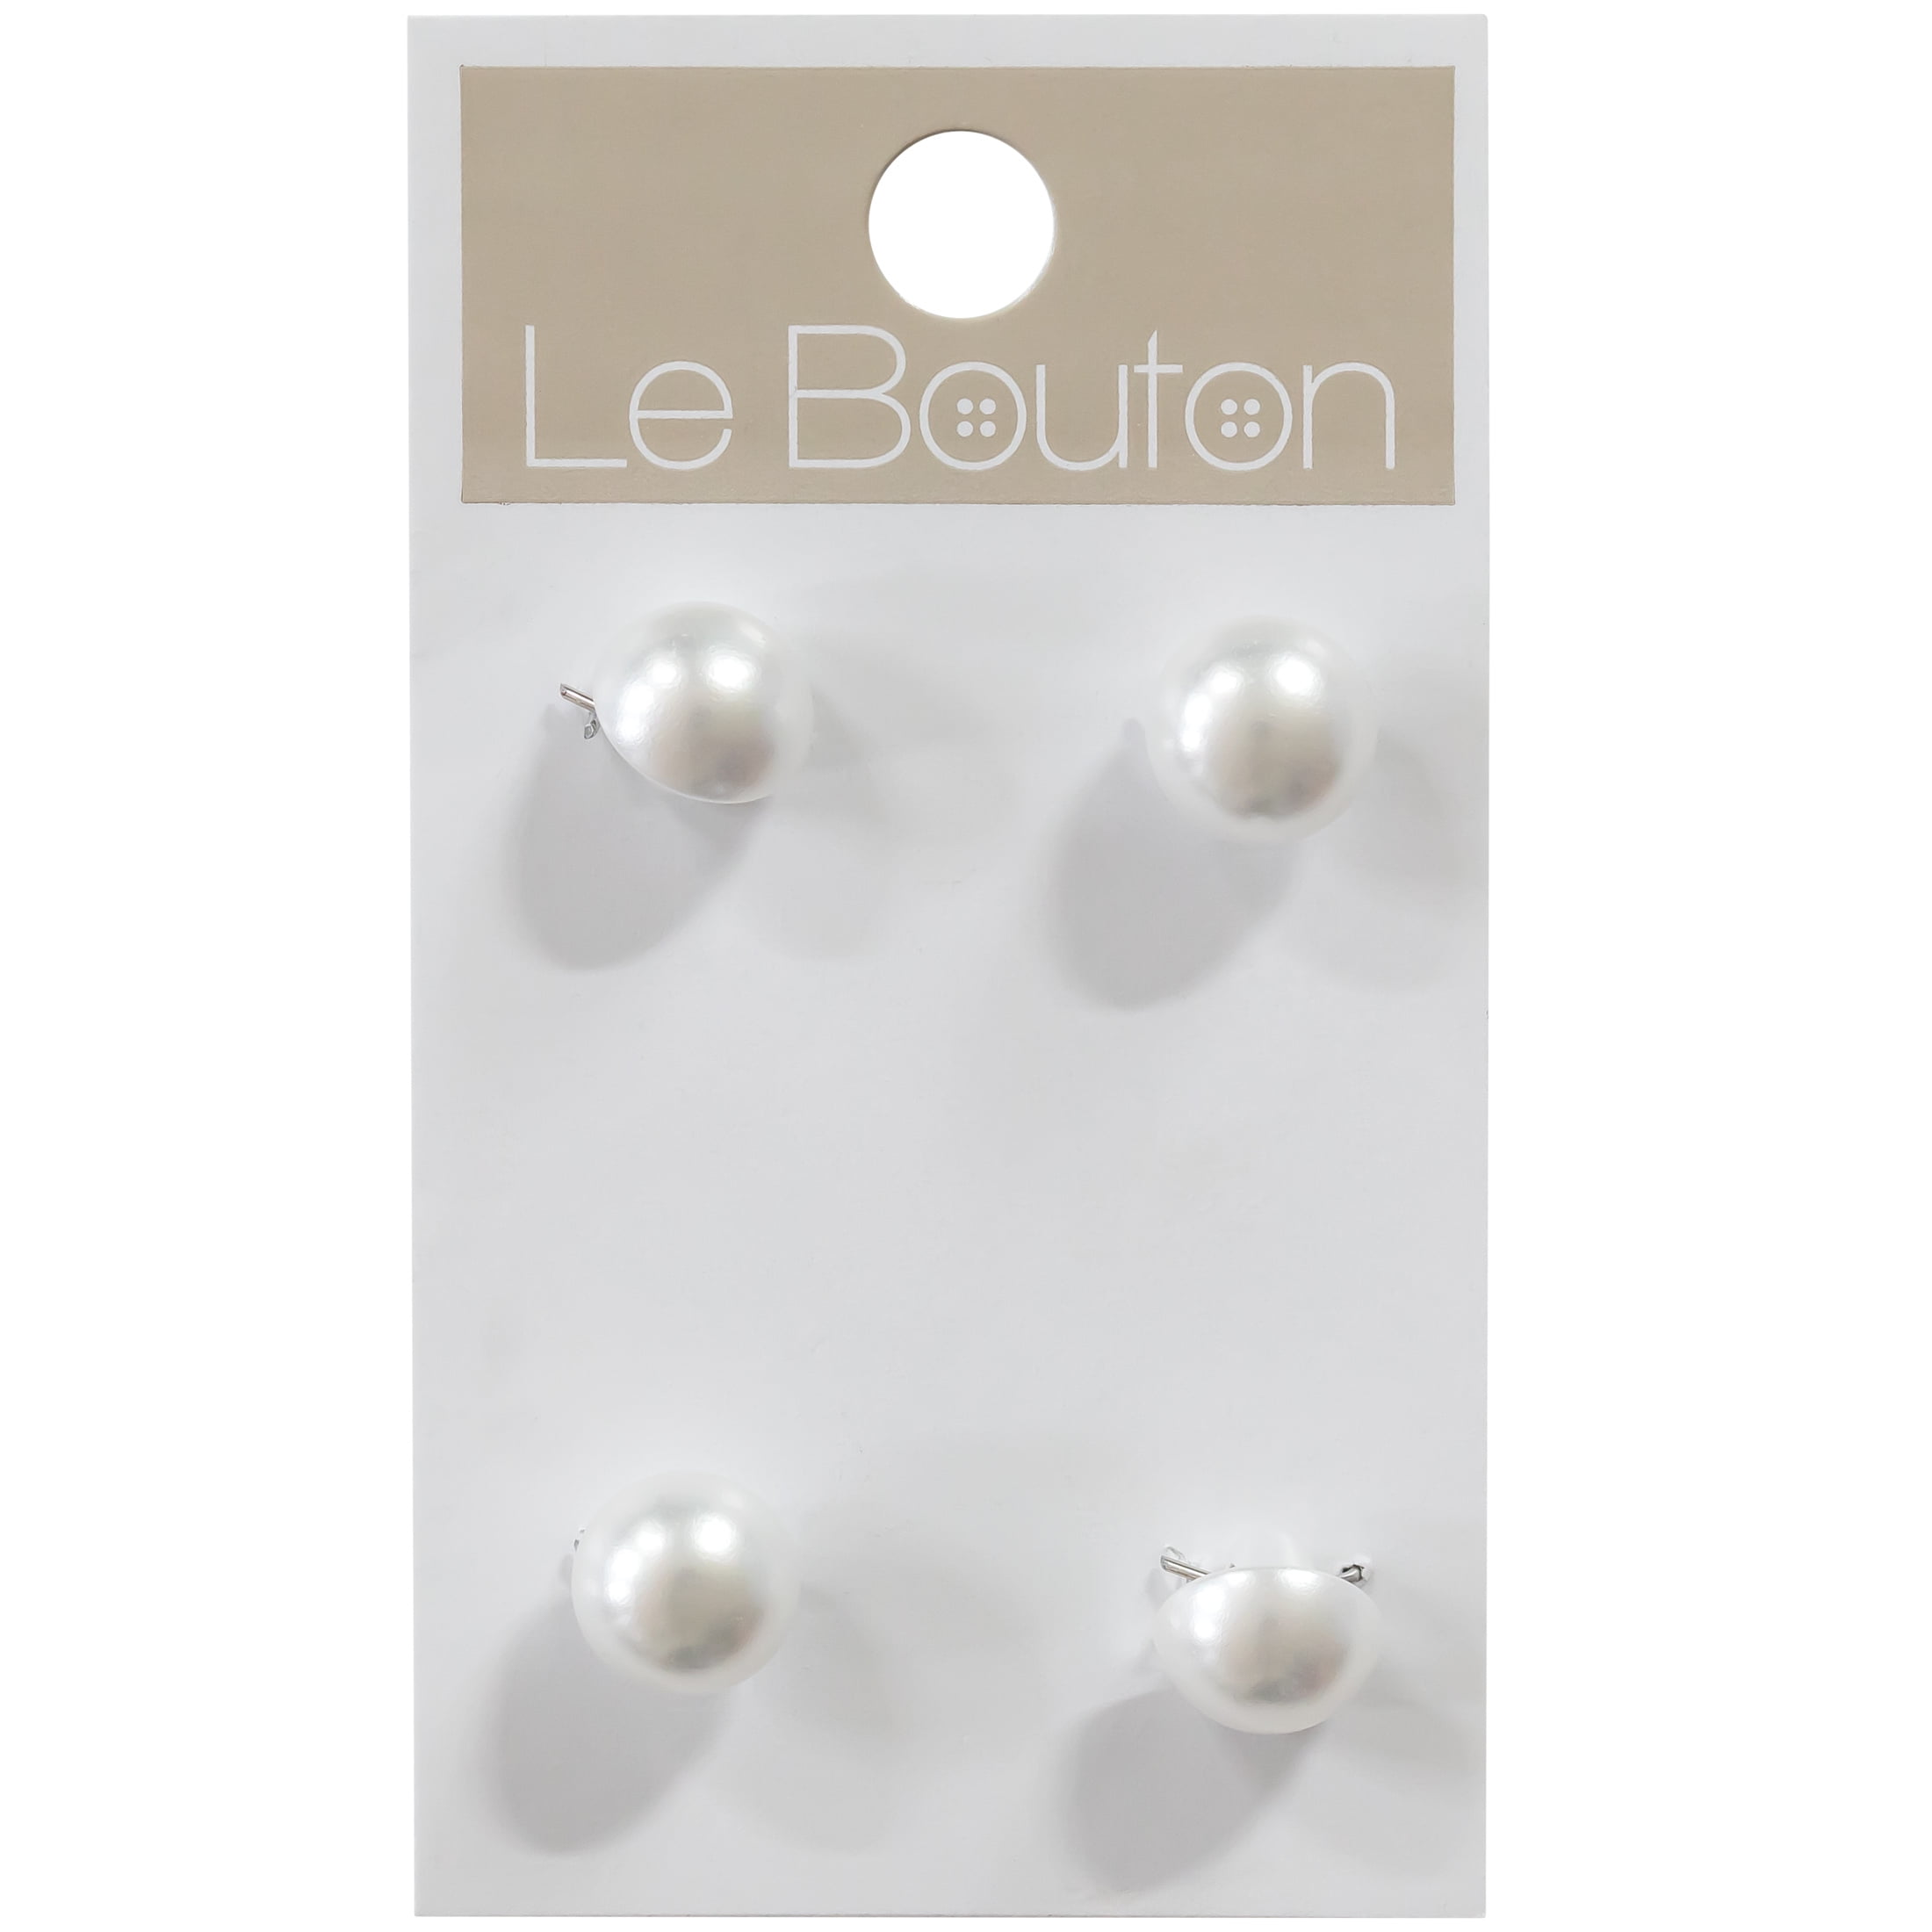 set of 4 Pearl buttons pearl look buttons vintage buttons creamy white round buttons